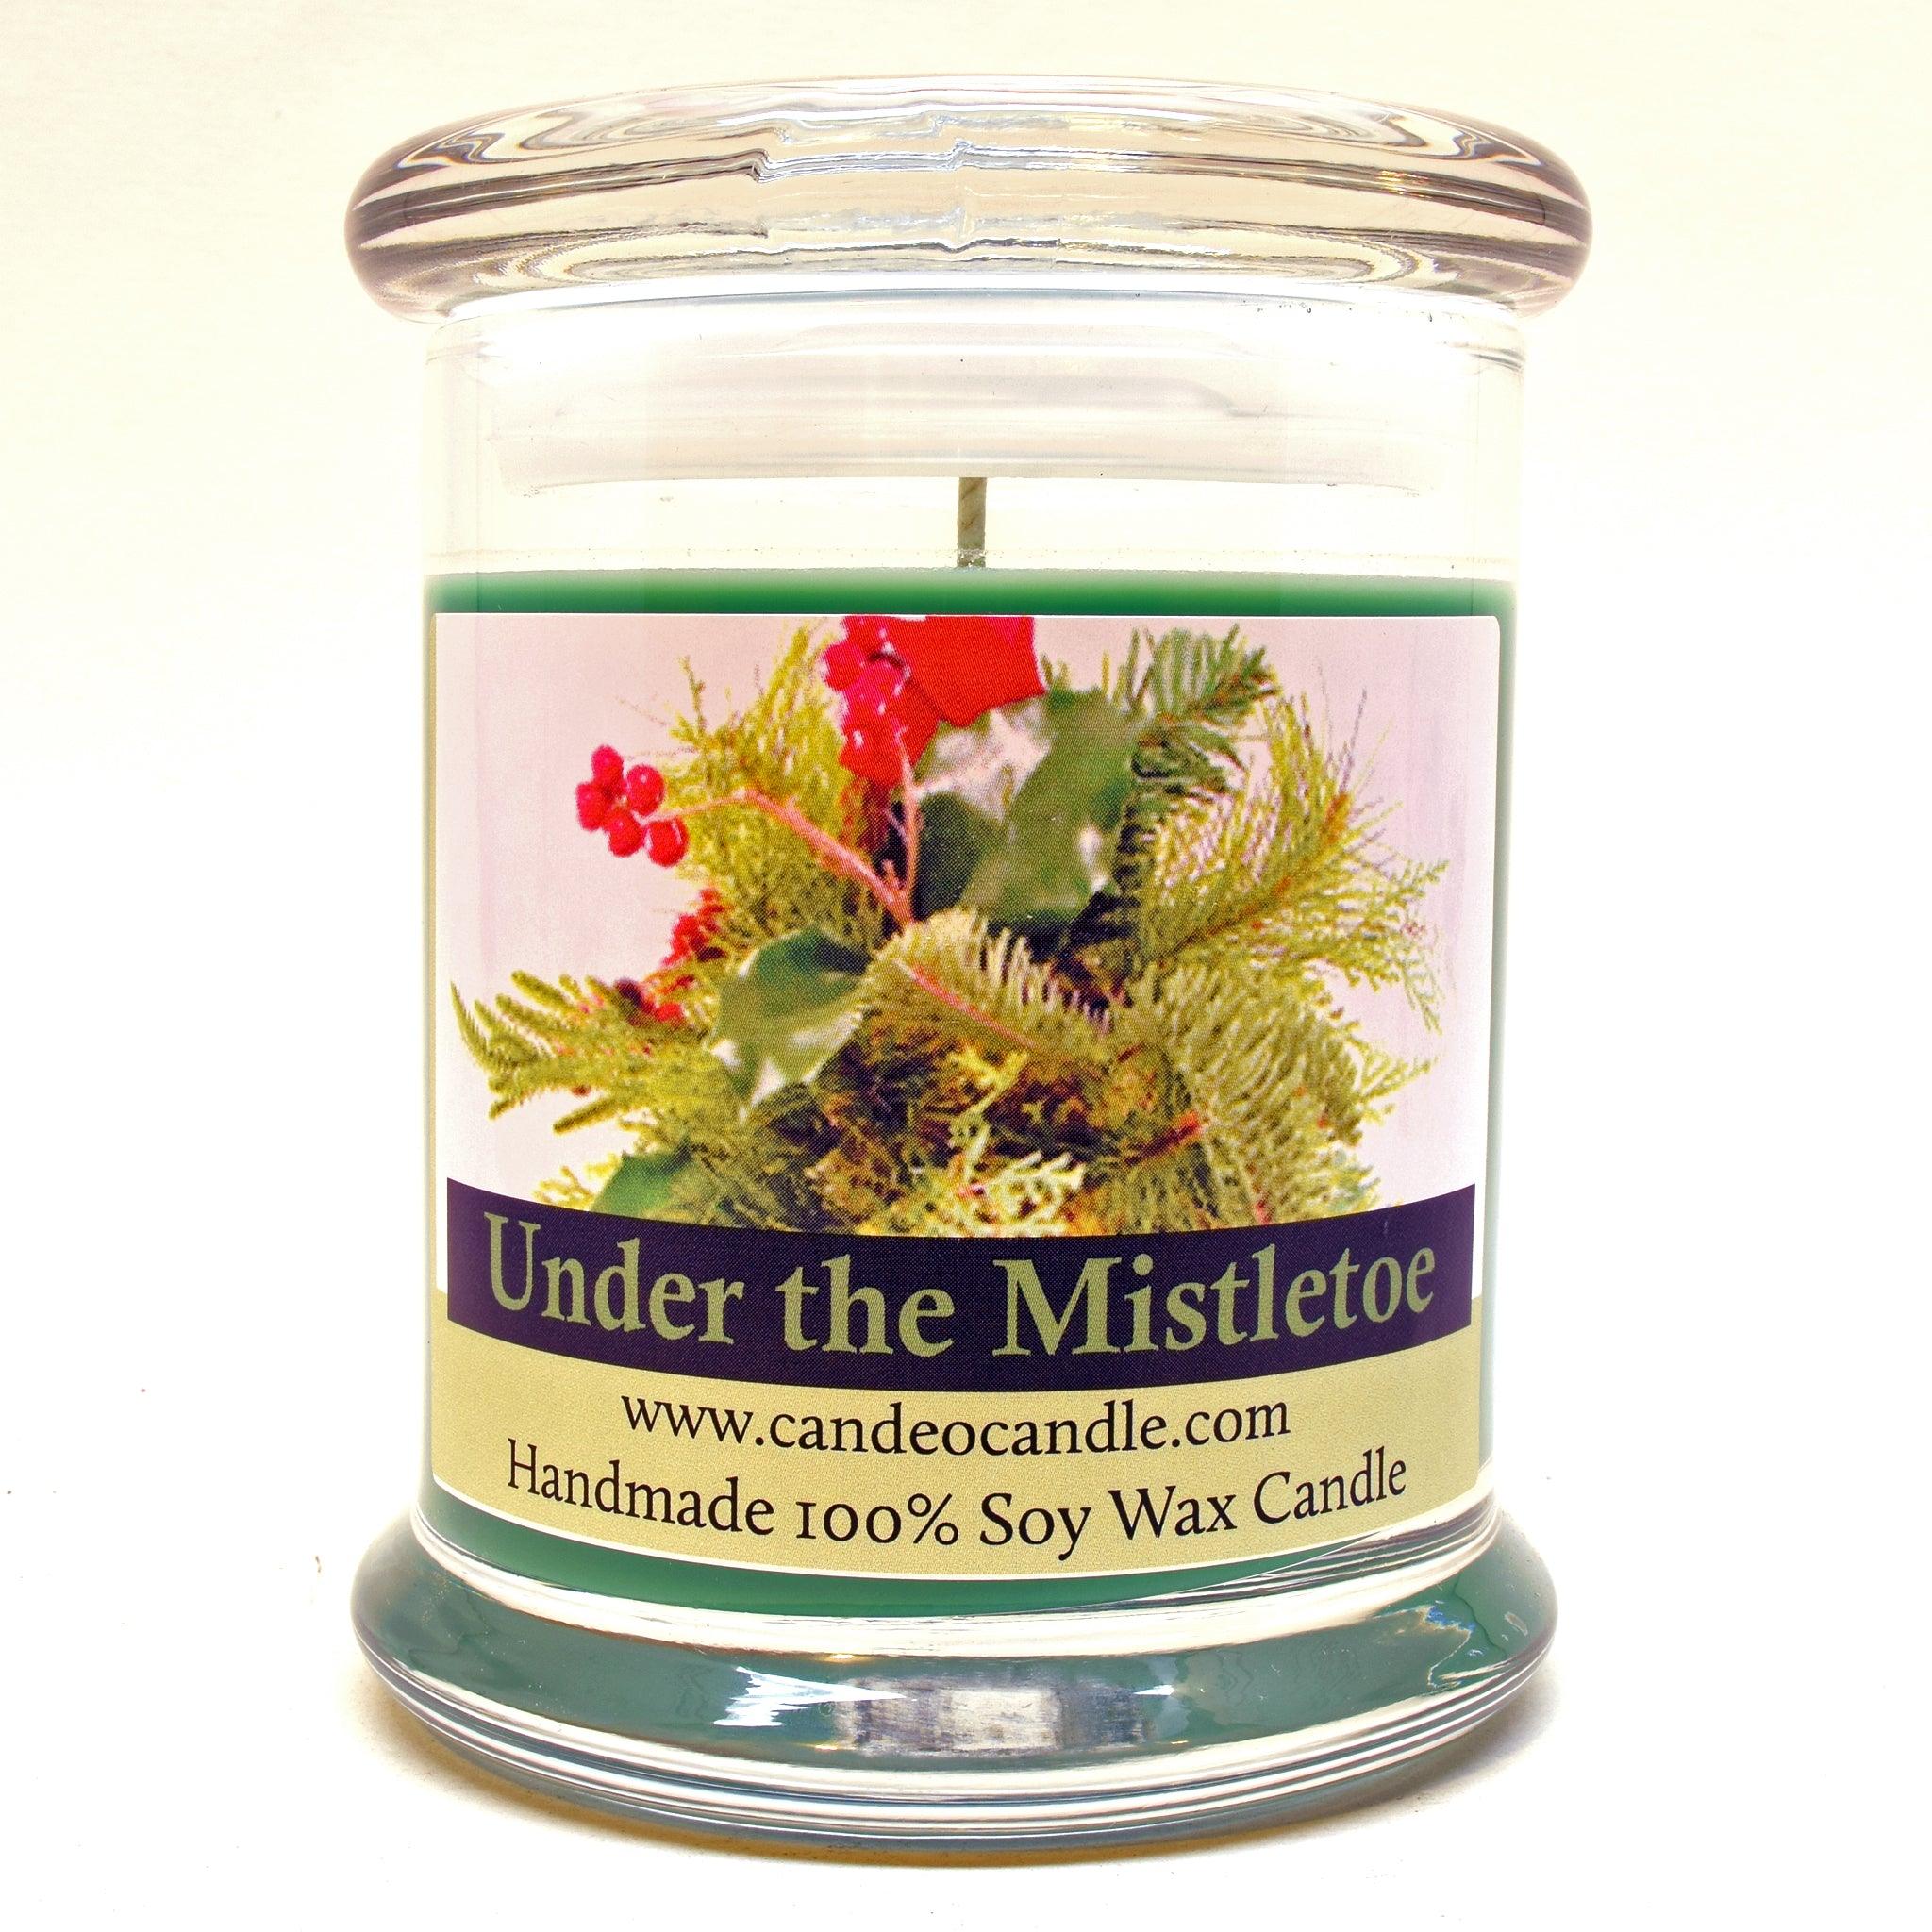 Under the Mistletoe, 9oz Soy Candle Jar - Candeo Candle